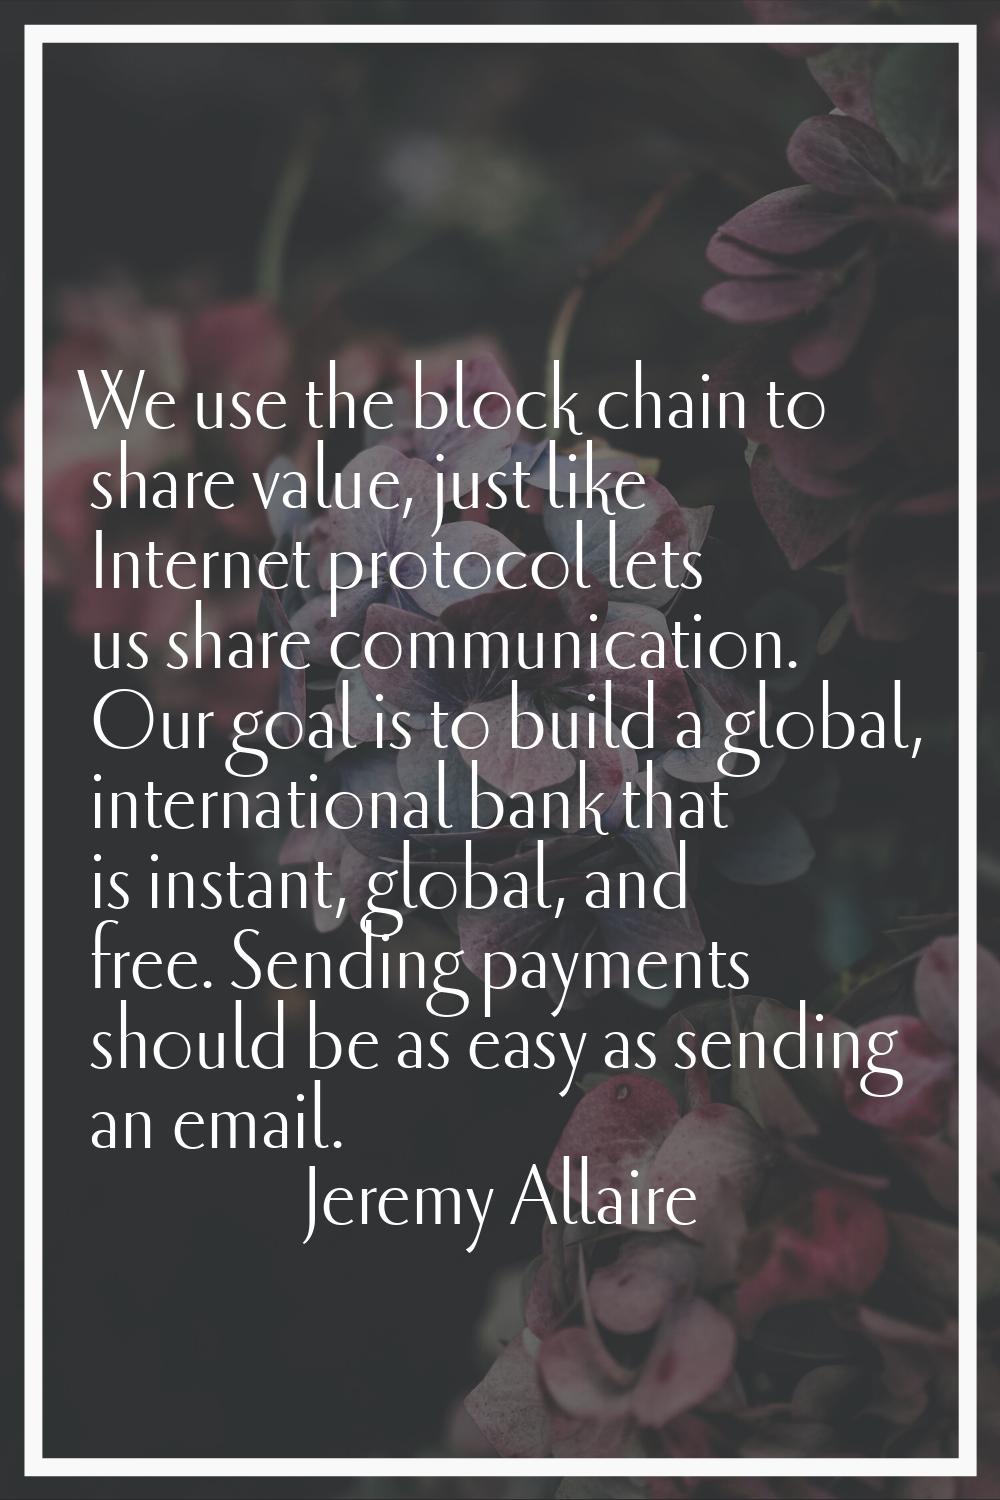 We use the block chain to share value, just like Internet protocol lets us share communication. Our